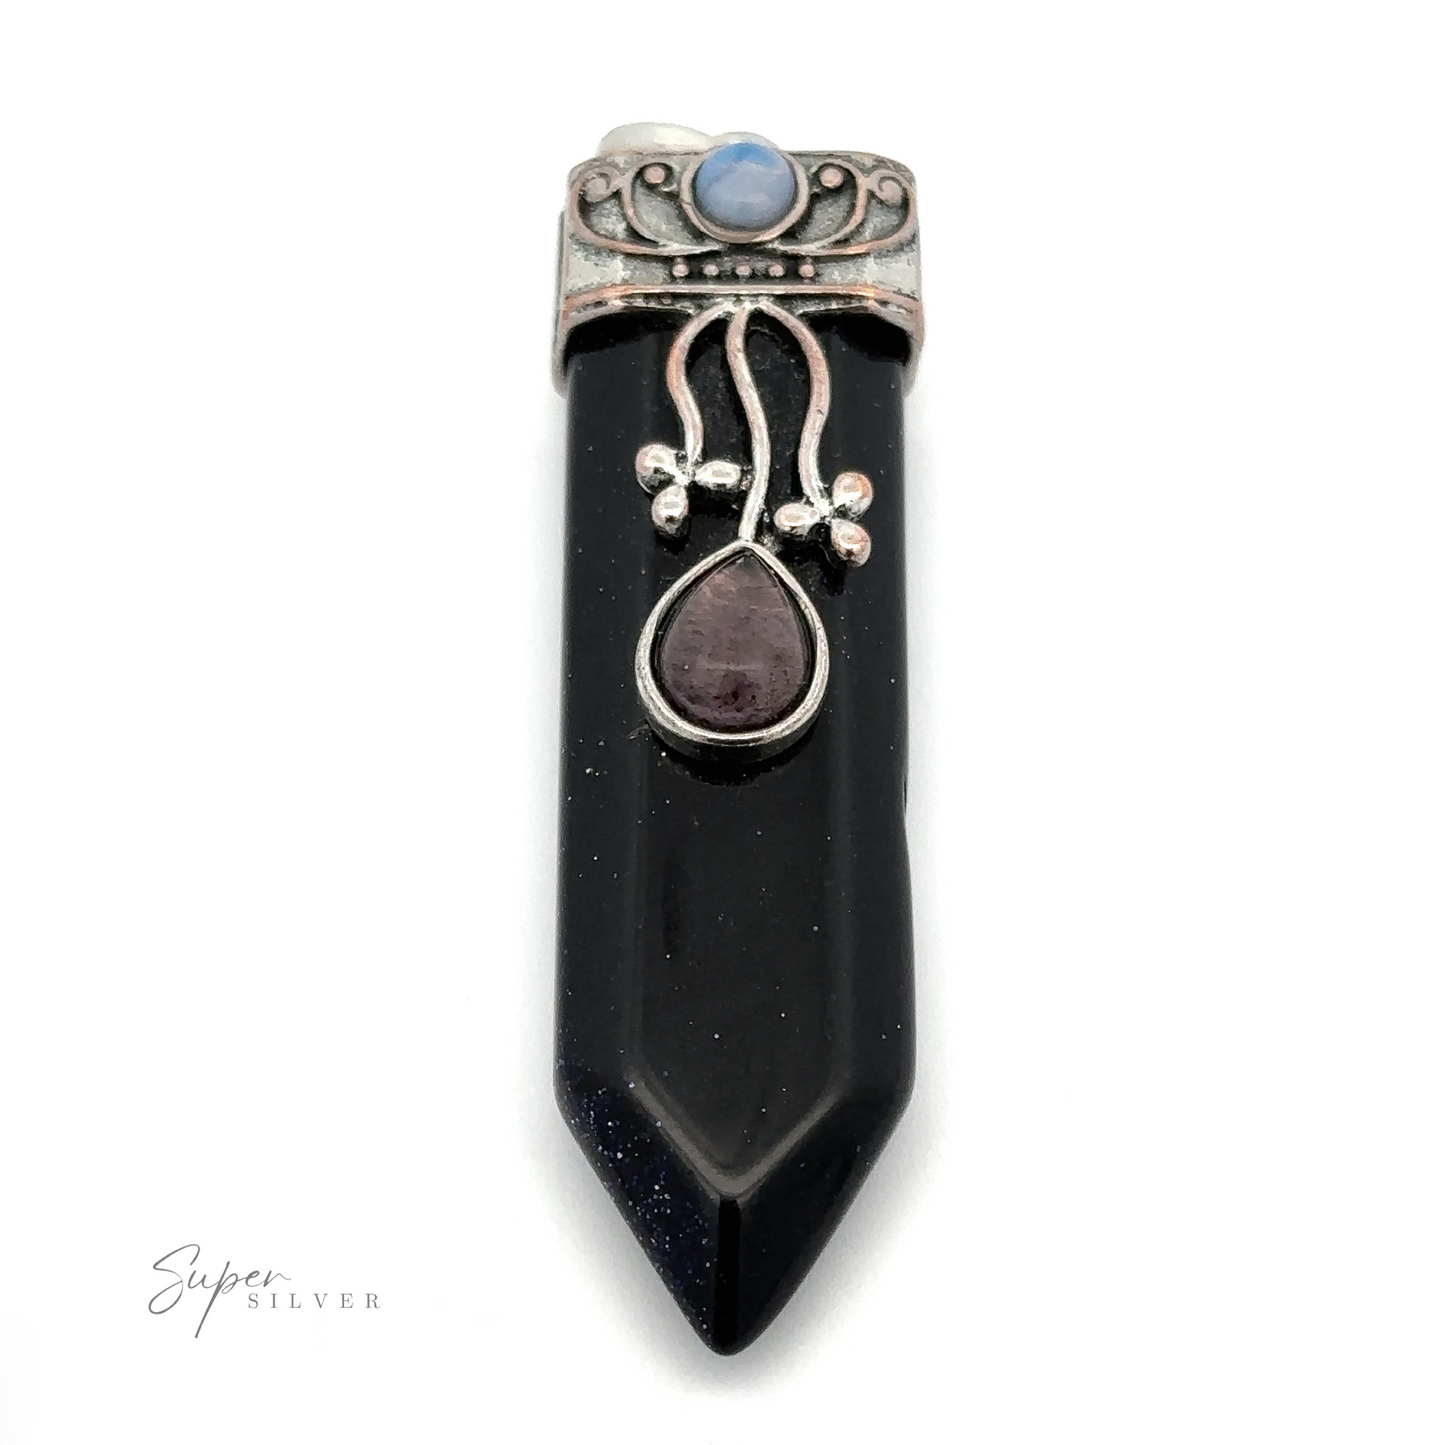 
                  
                    A decorative Obelisk Crystal Stone Pendant featuring an elongated black gemstone with silver ornate detailing and two additional gemstones—Opalite at the top and Amethyst at the center. The pendant is labeled "Super Silver.
                  
                